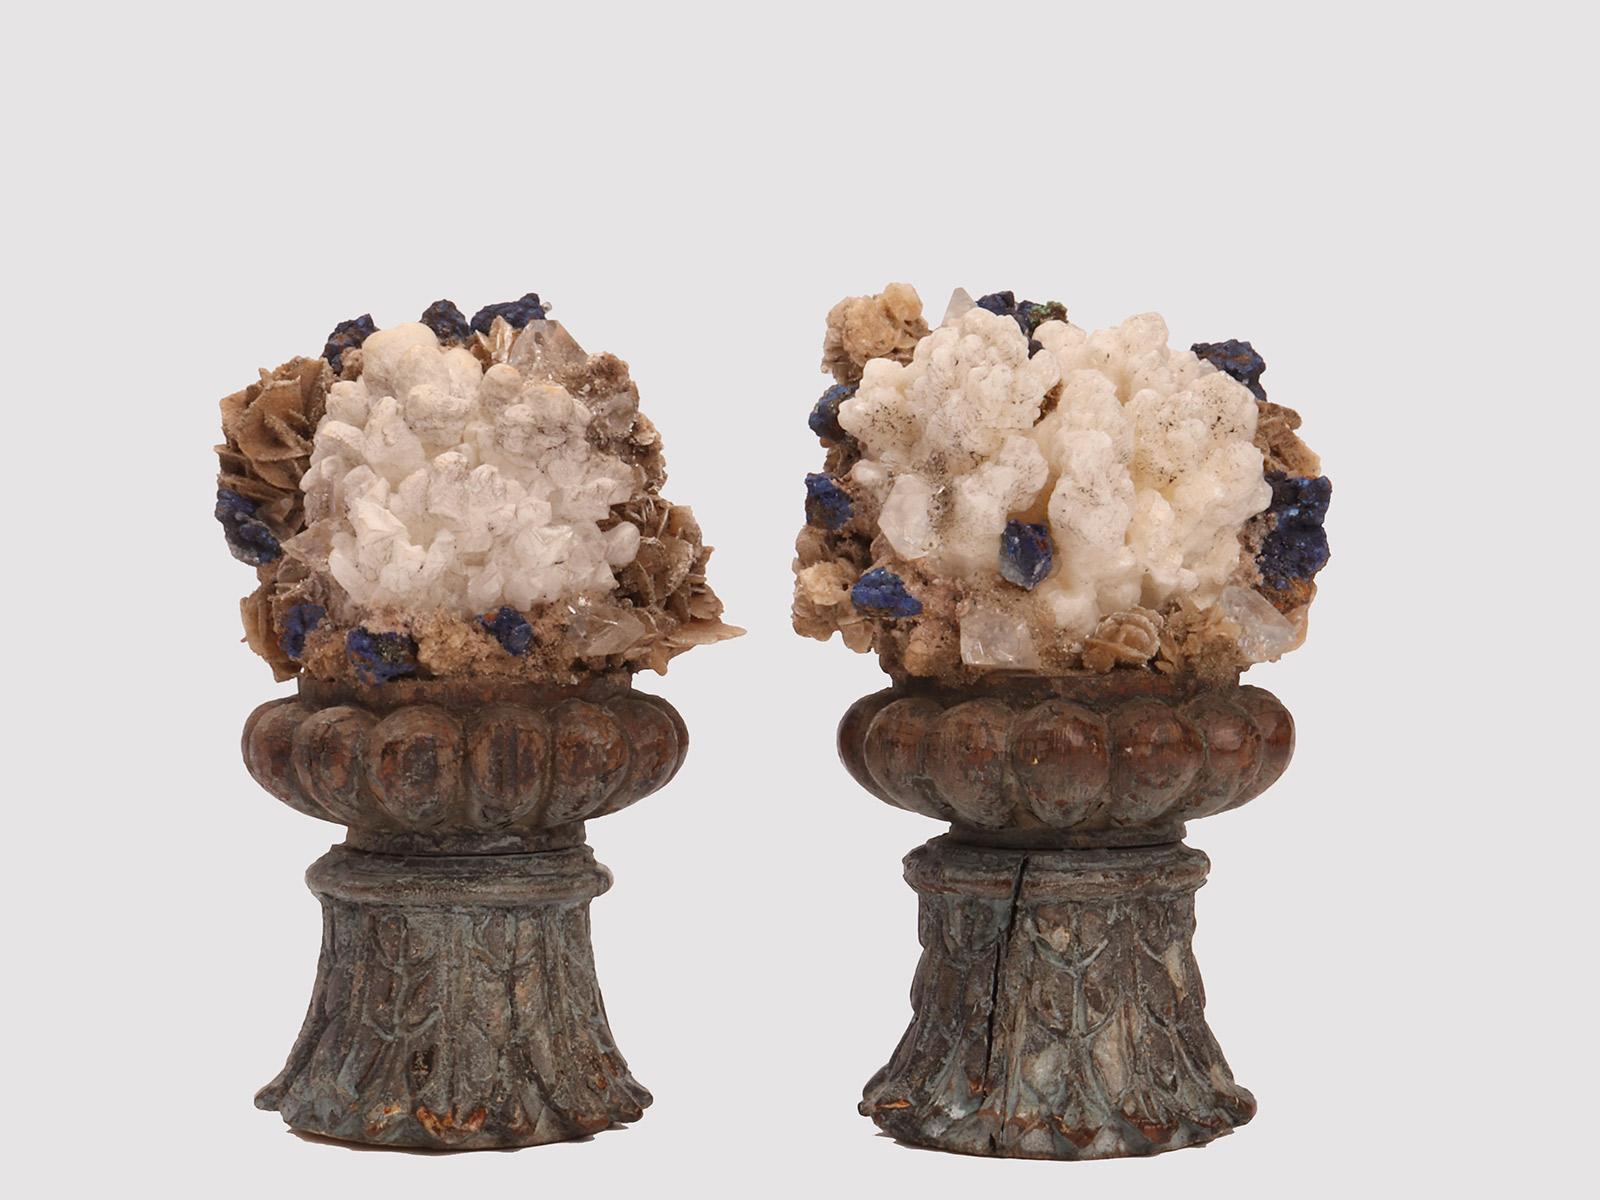 A Naturalia mineral specimen. A pair of druze of Calcite flowers crystals, rock crystals and blu quartz, mounted over carved wooden base, vase shape laquered green color. Italy circa 1880.